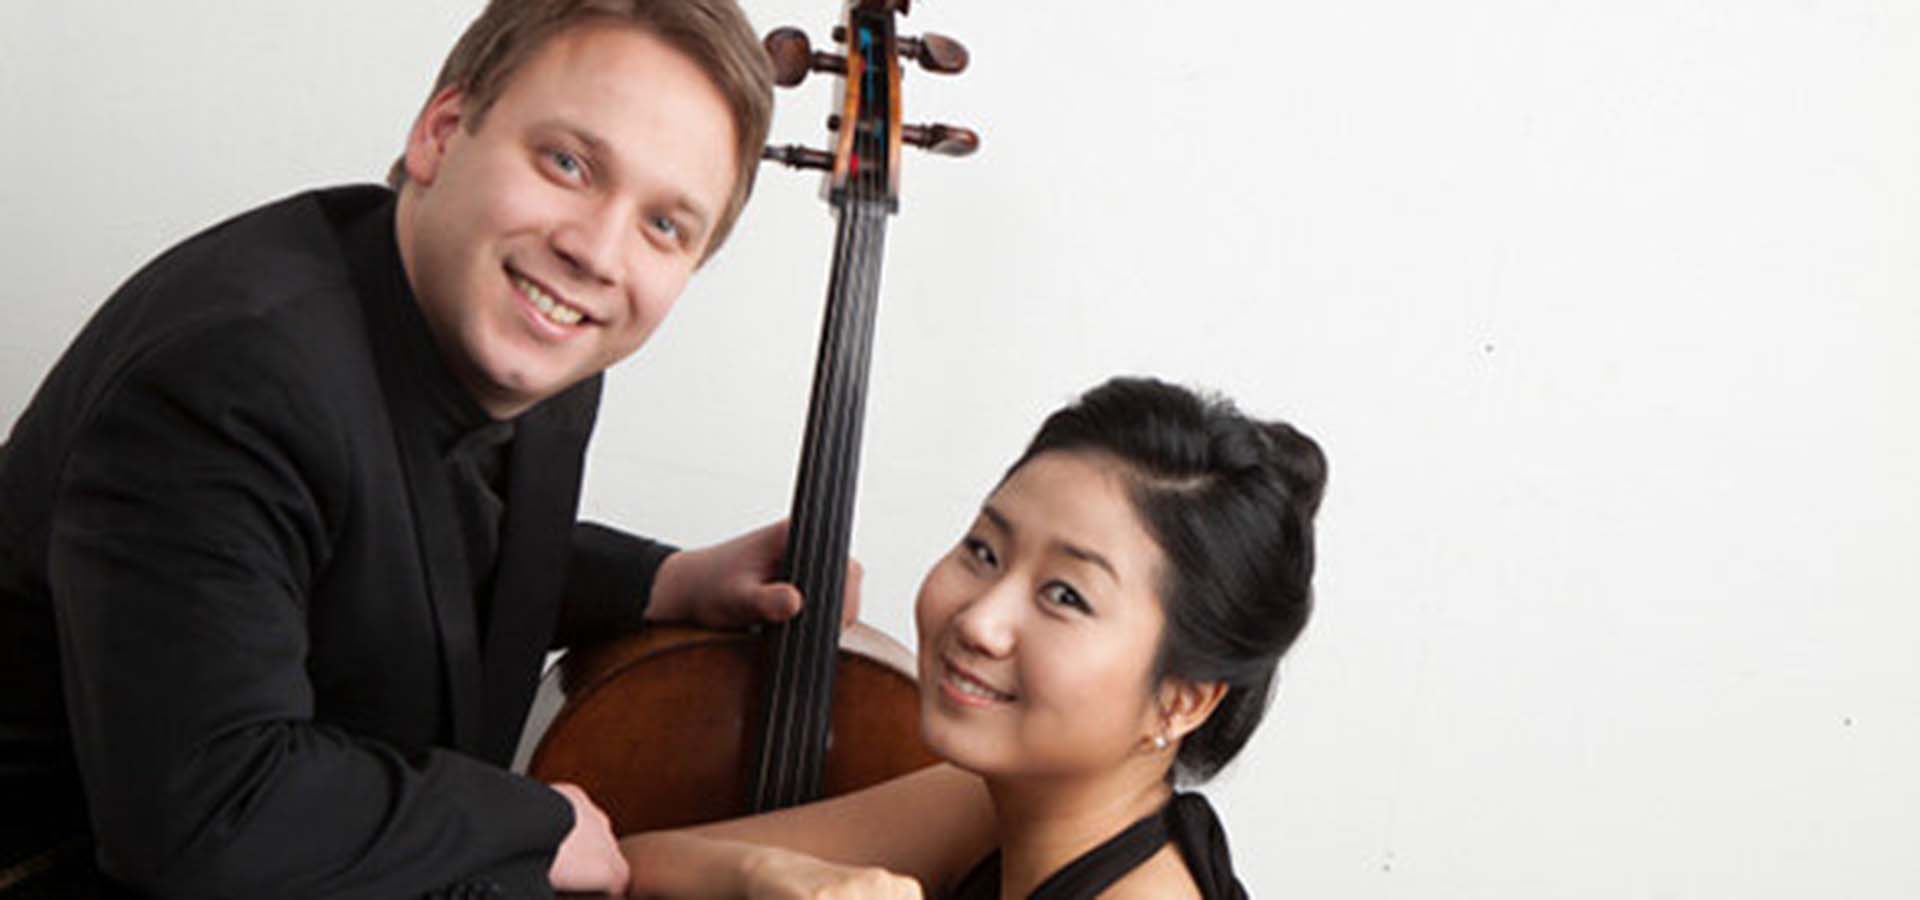 White male and Asian female classical musicians